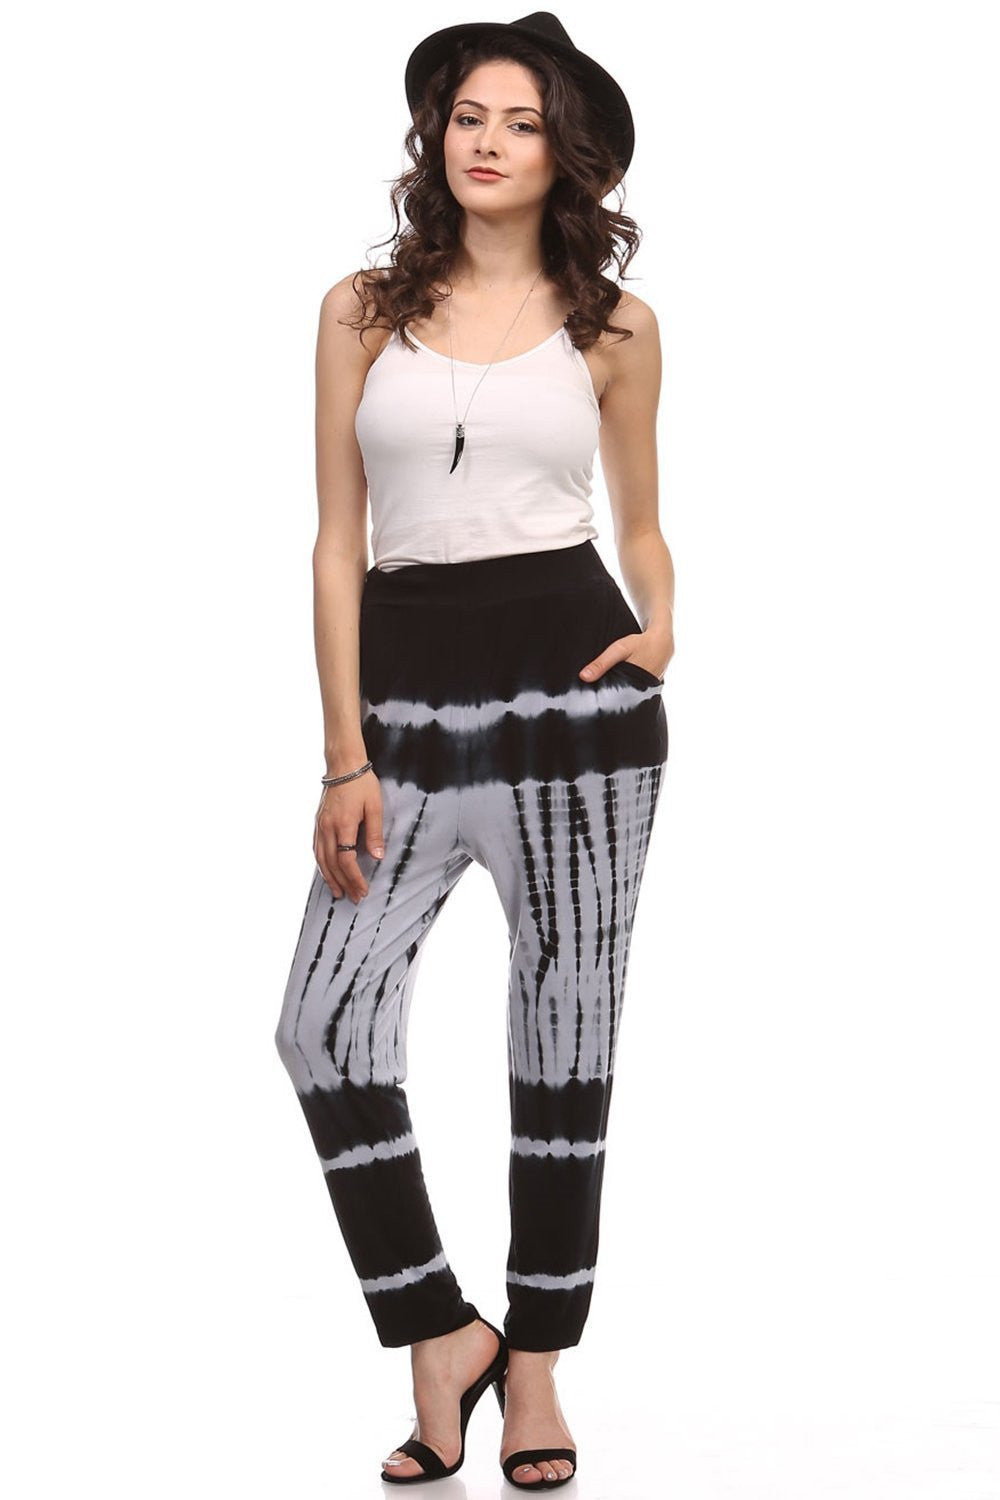 beautiful woman wearing an black and grey Bamboo Tie dye joggers with pockets